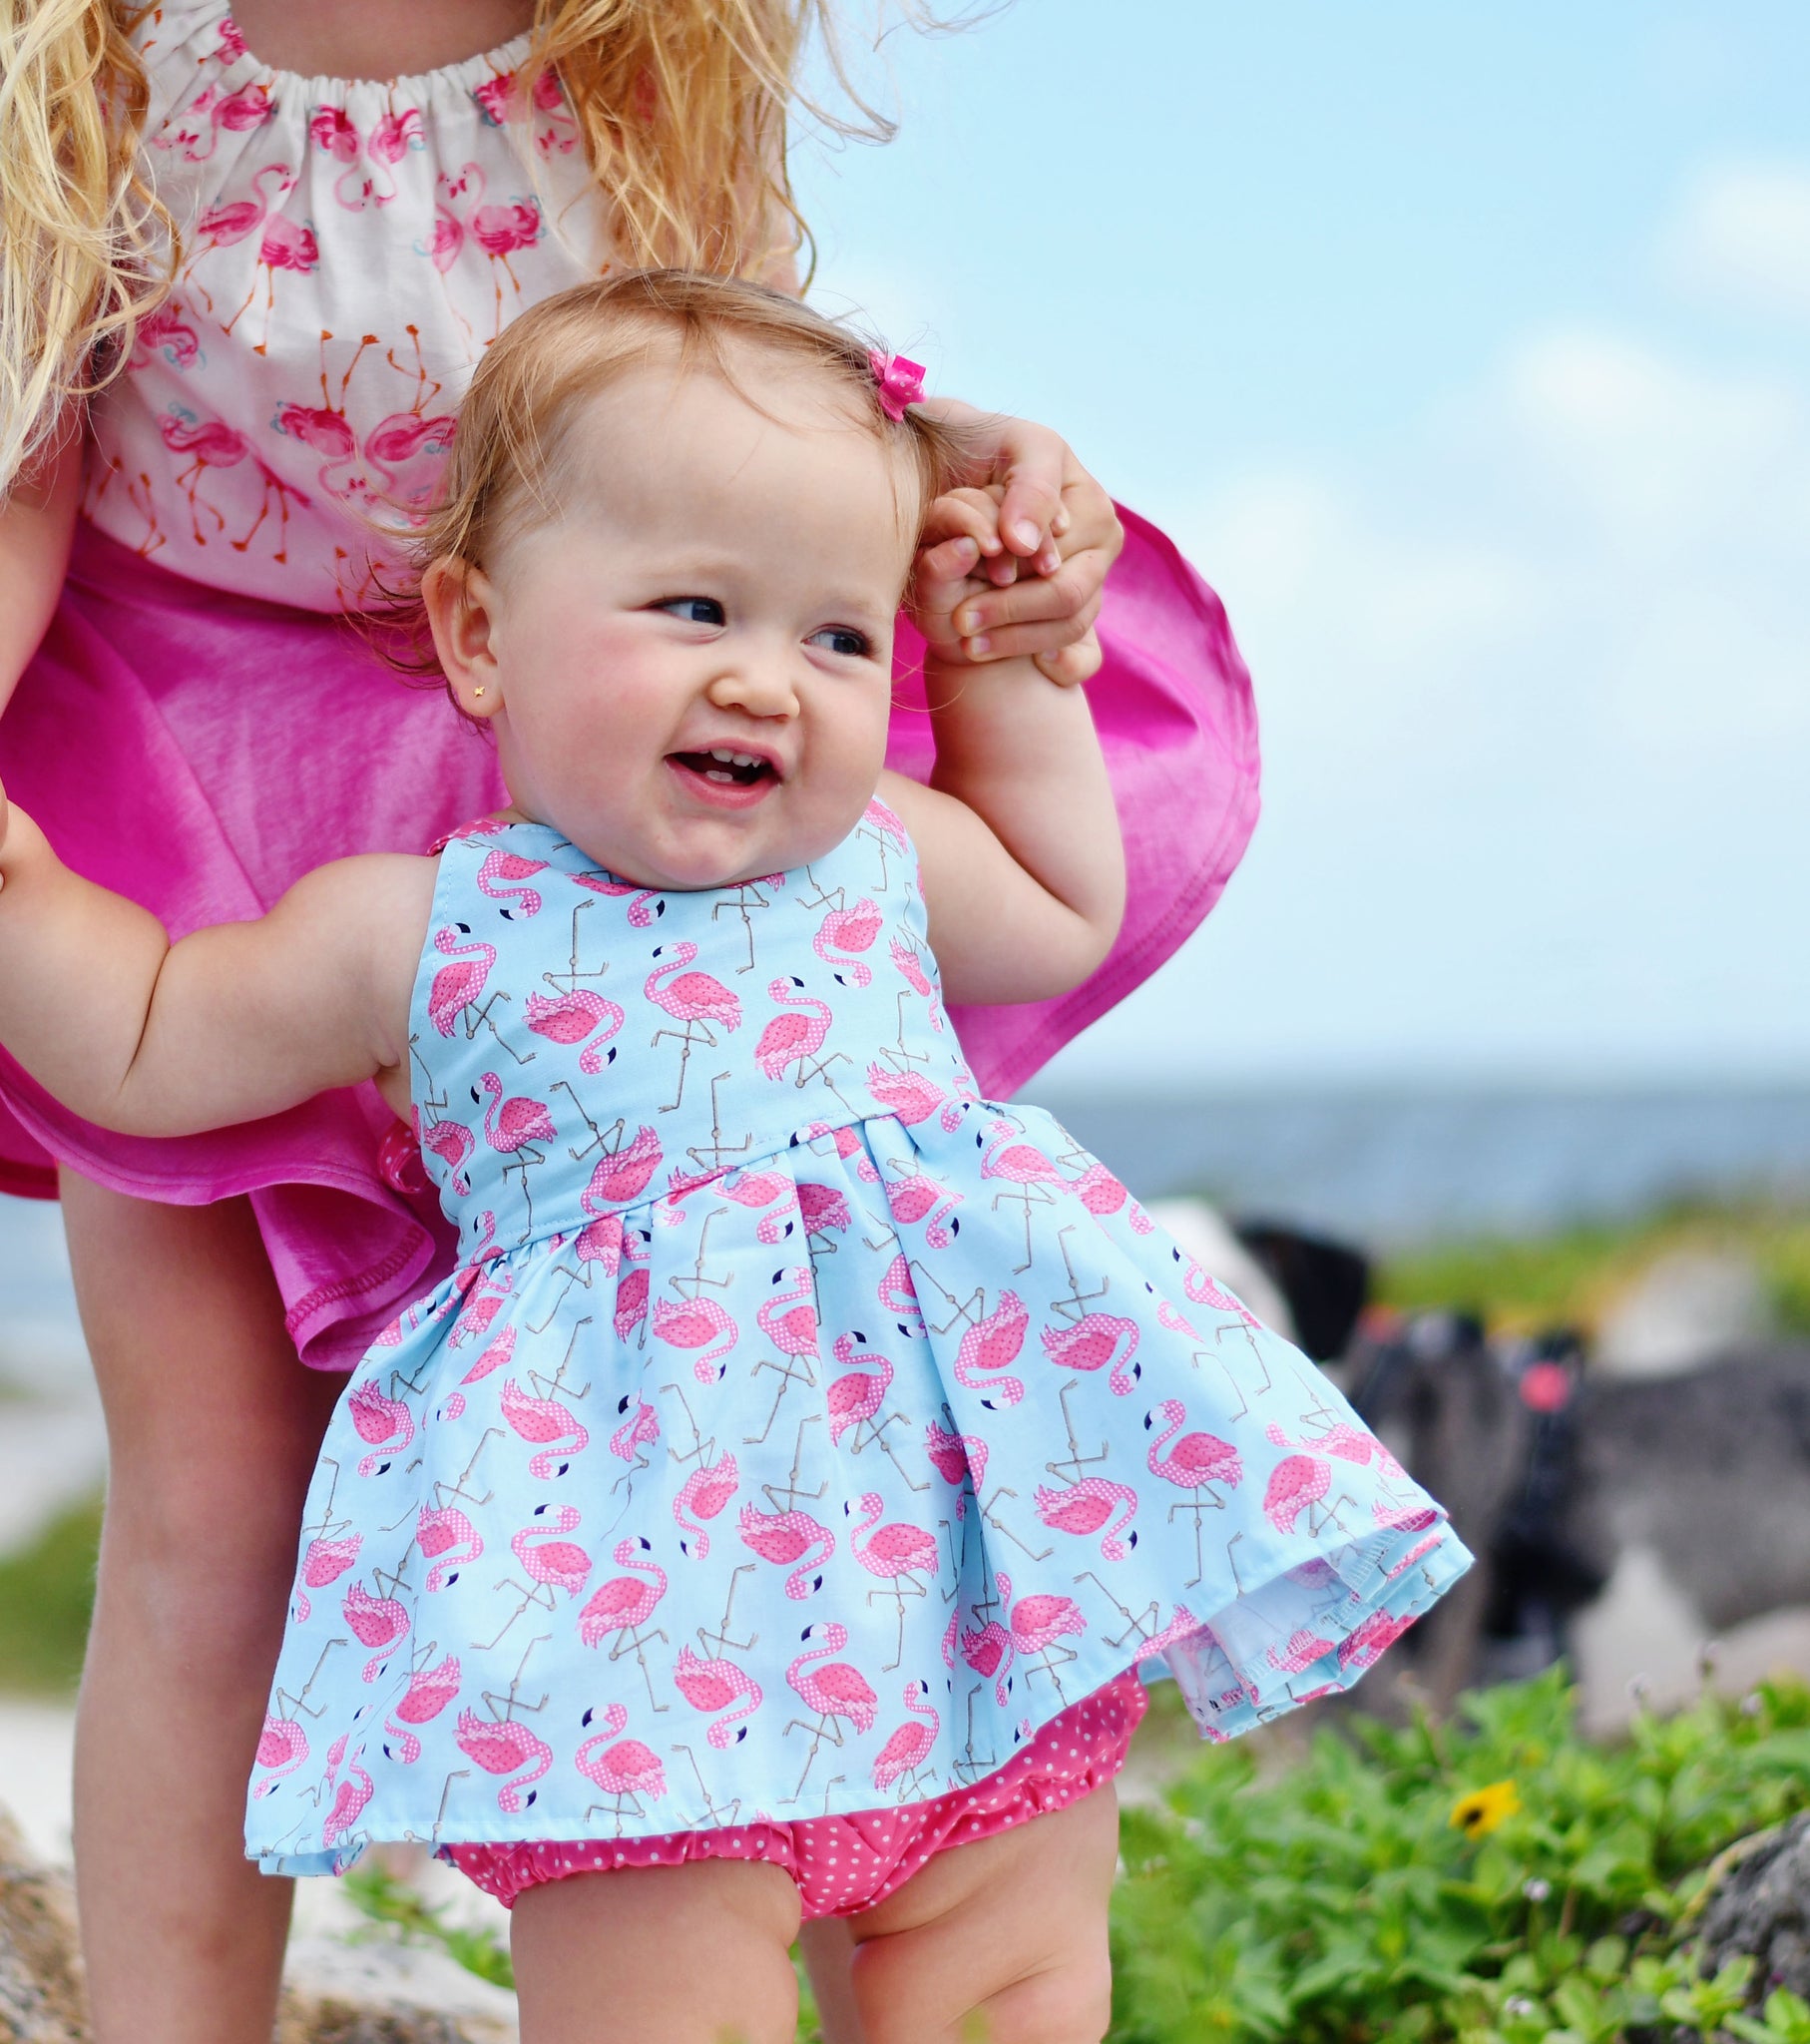 May Flamingo Dress of the Month – Blu Moon Design